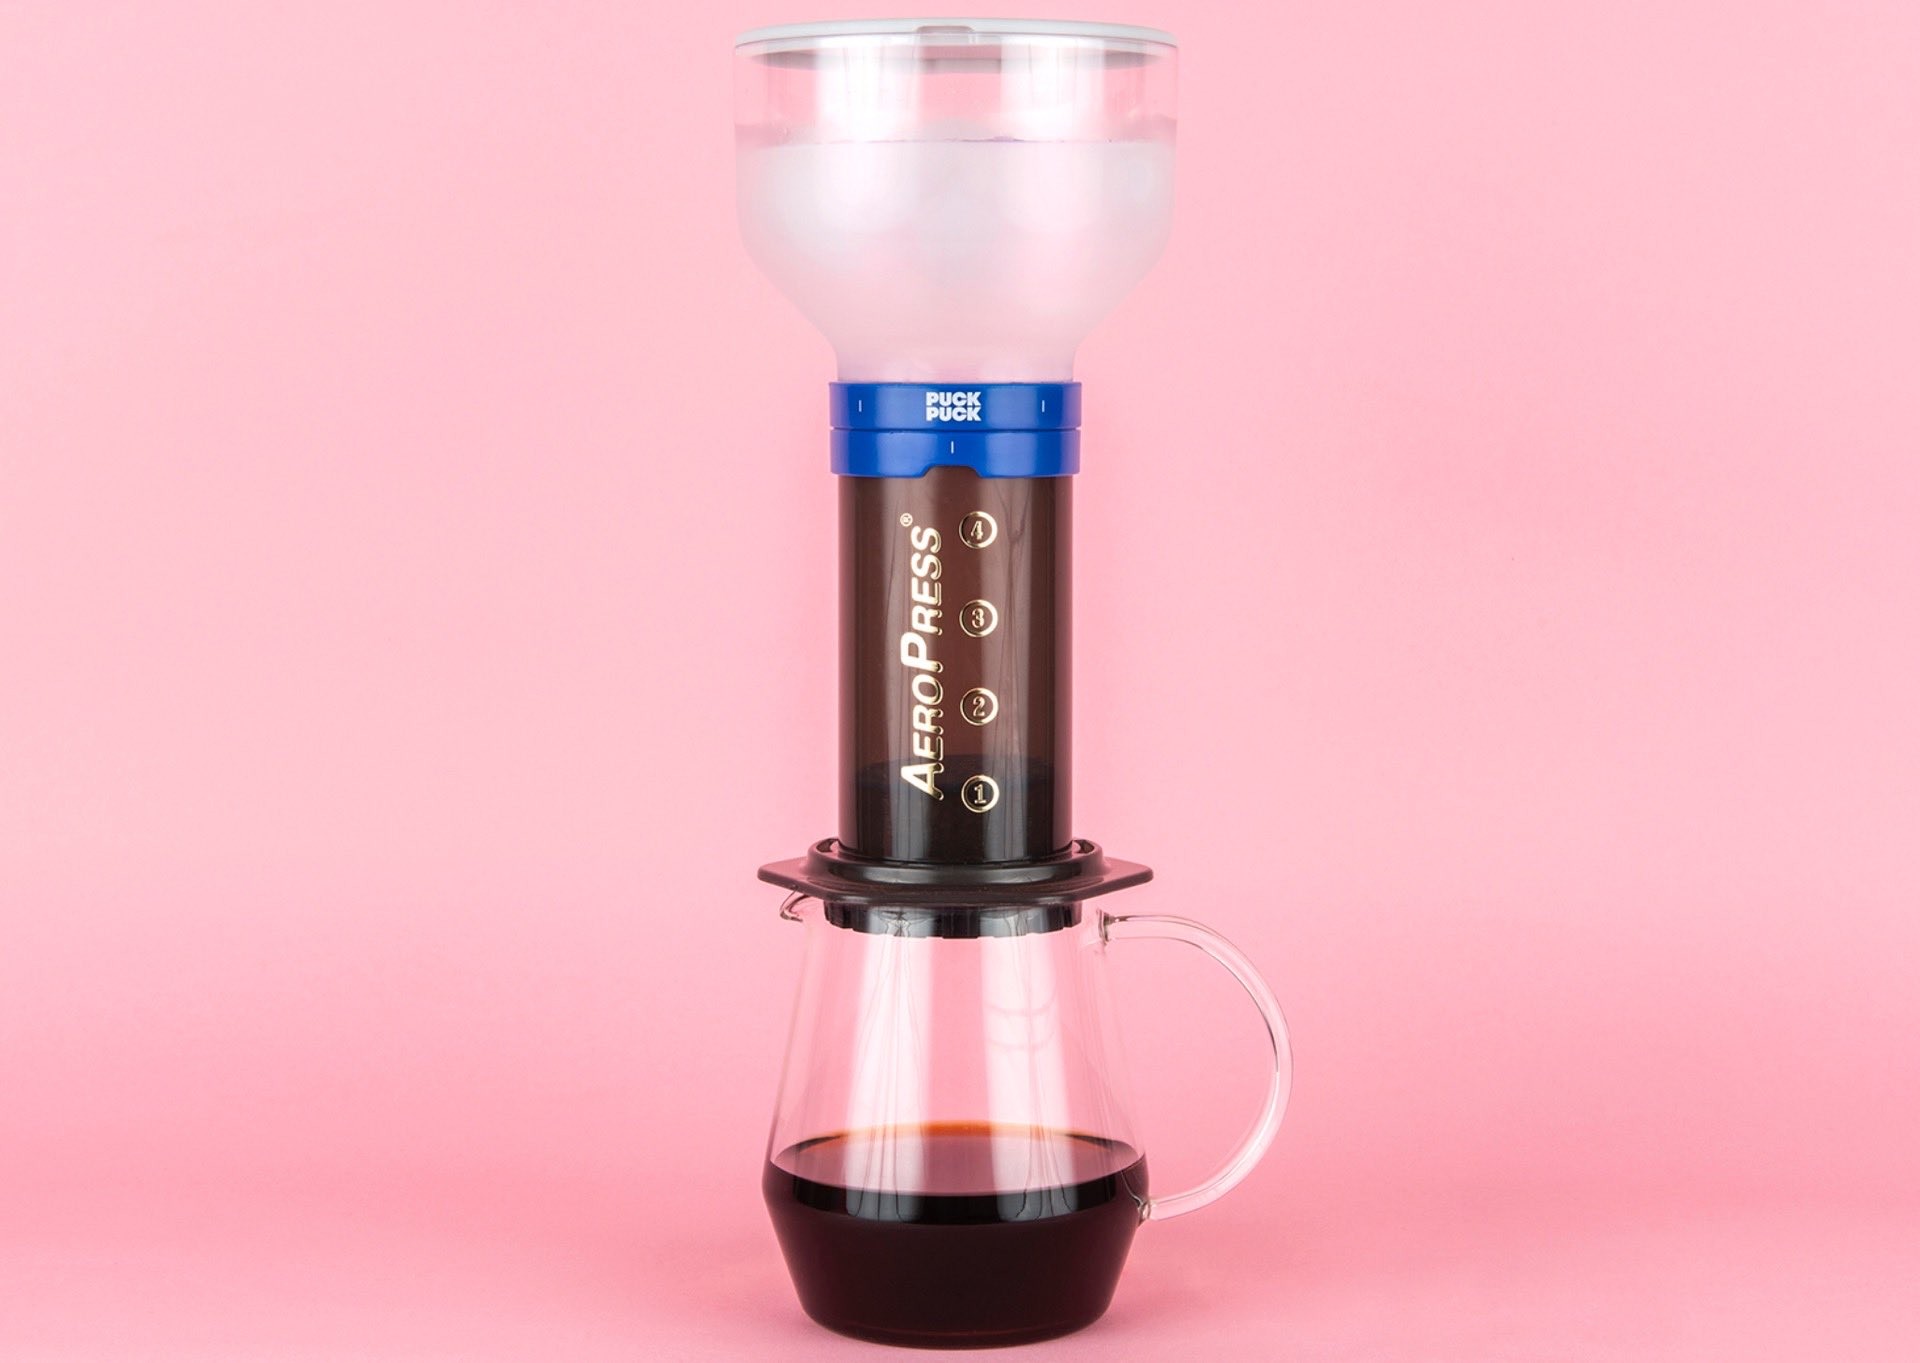 The PUCKPUCK turns the AeroPress into a cold-brew drip system. ($25)